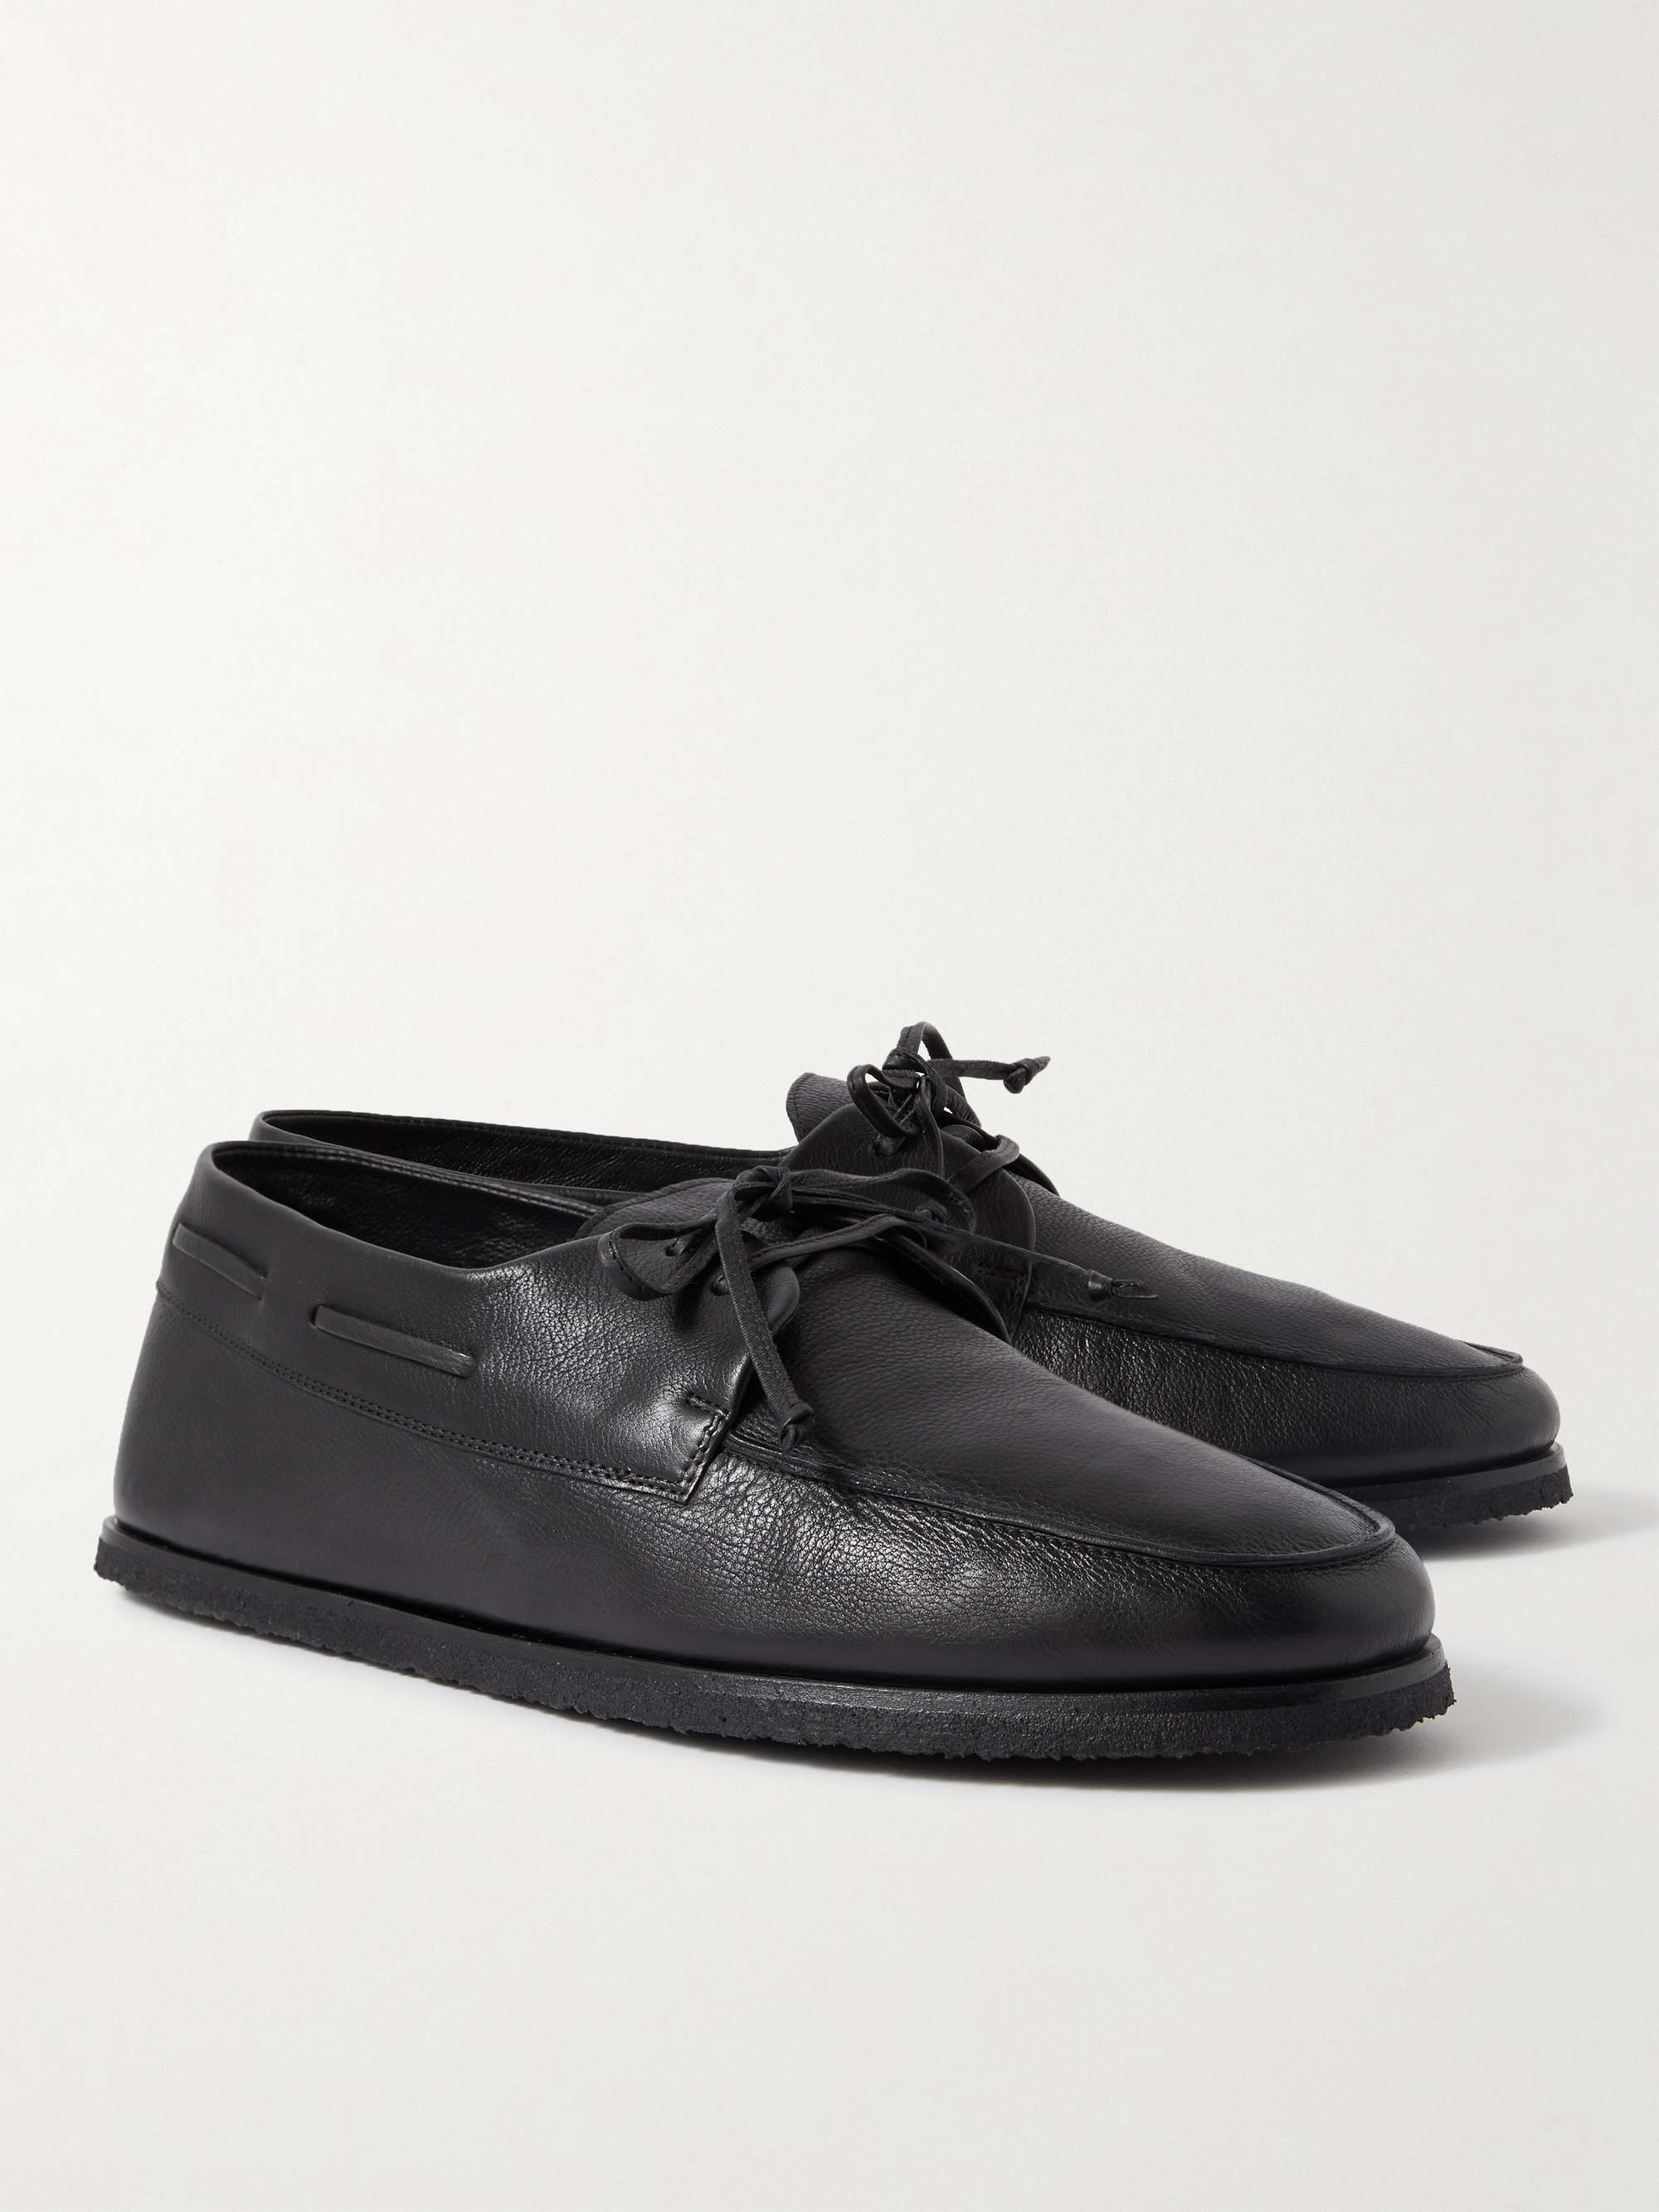 THE ROW Sailor Full-Grain Leather Boat Shoes